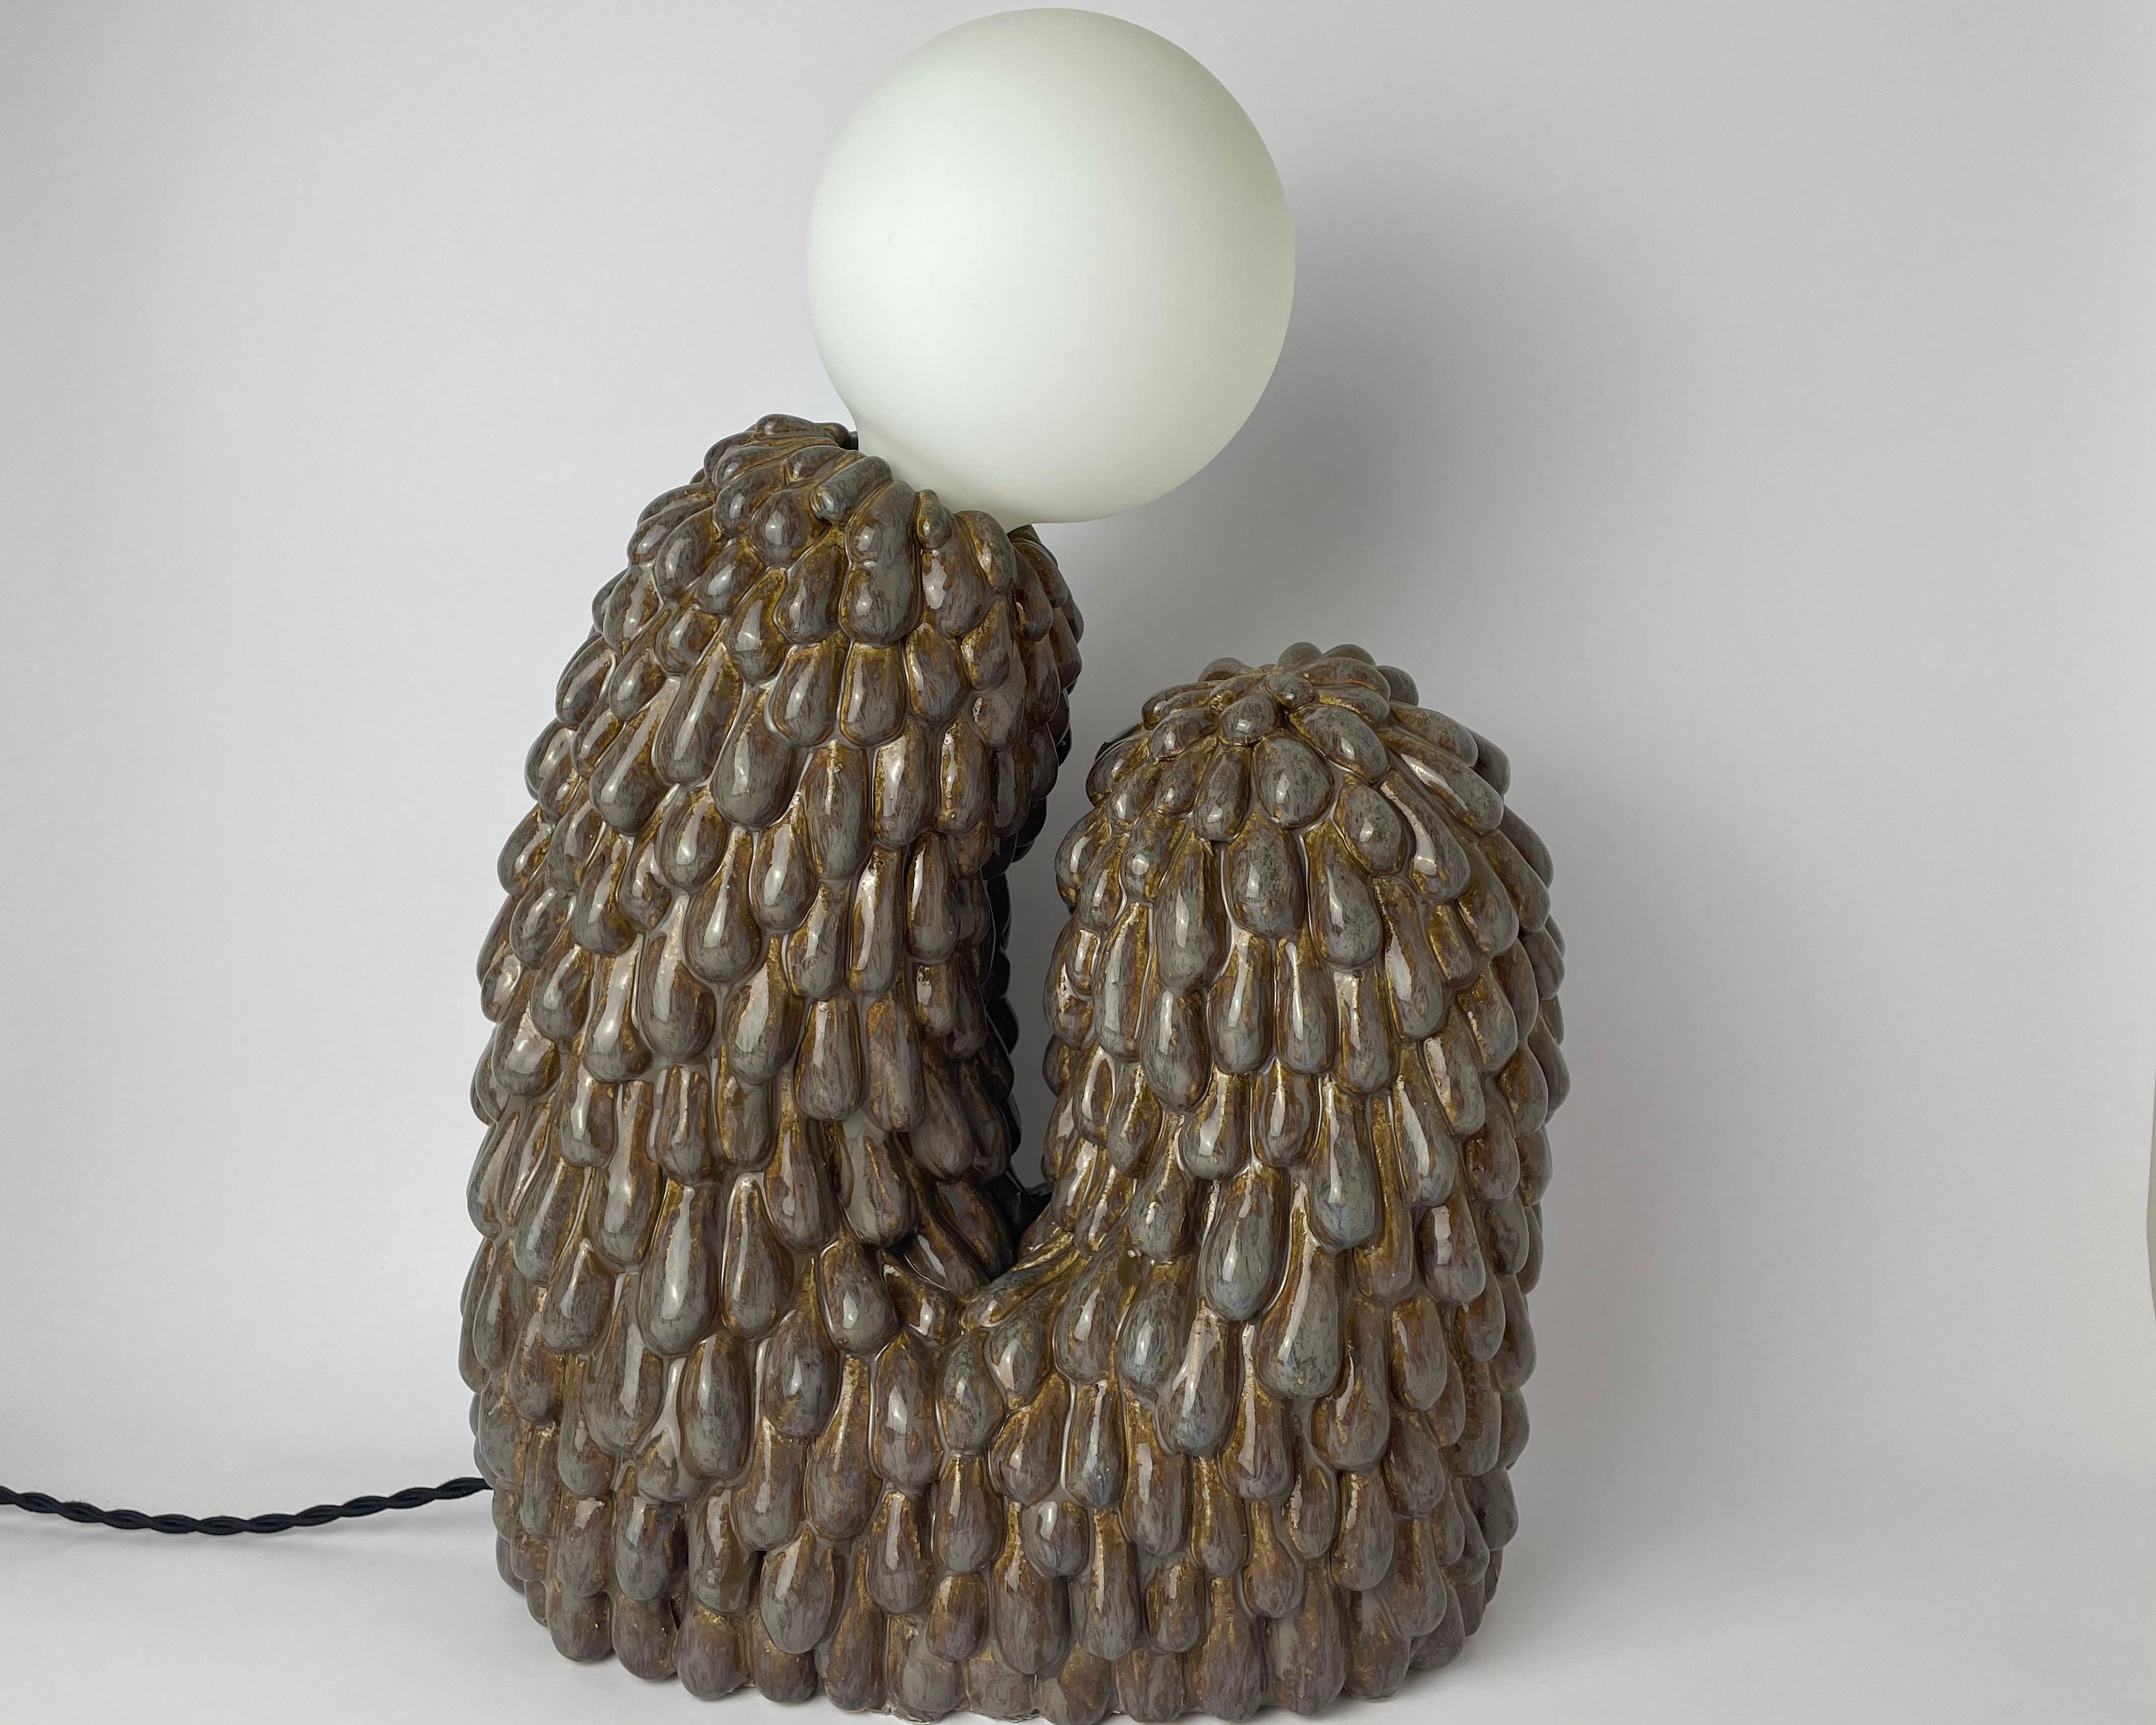 Large Evolve lamp by HS Studio
Morphic Collection
Dimensions: 43 x 40 x 15cm
Materials: Ceramic

Also available: 28 x 18 x 9cm

Hannah Simpson is a ceramic artist, based in Kent, UK. With a passion for creating unique items, Hannah's work